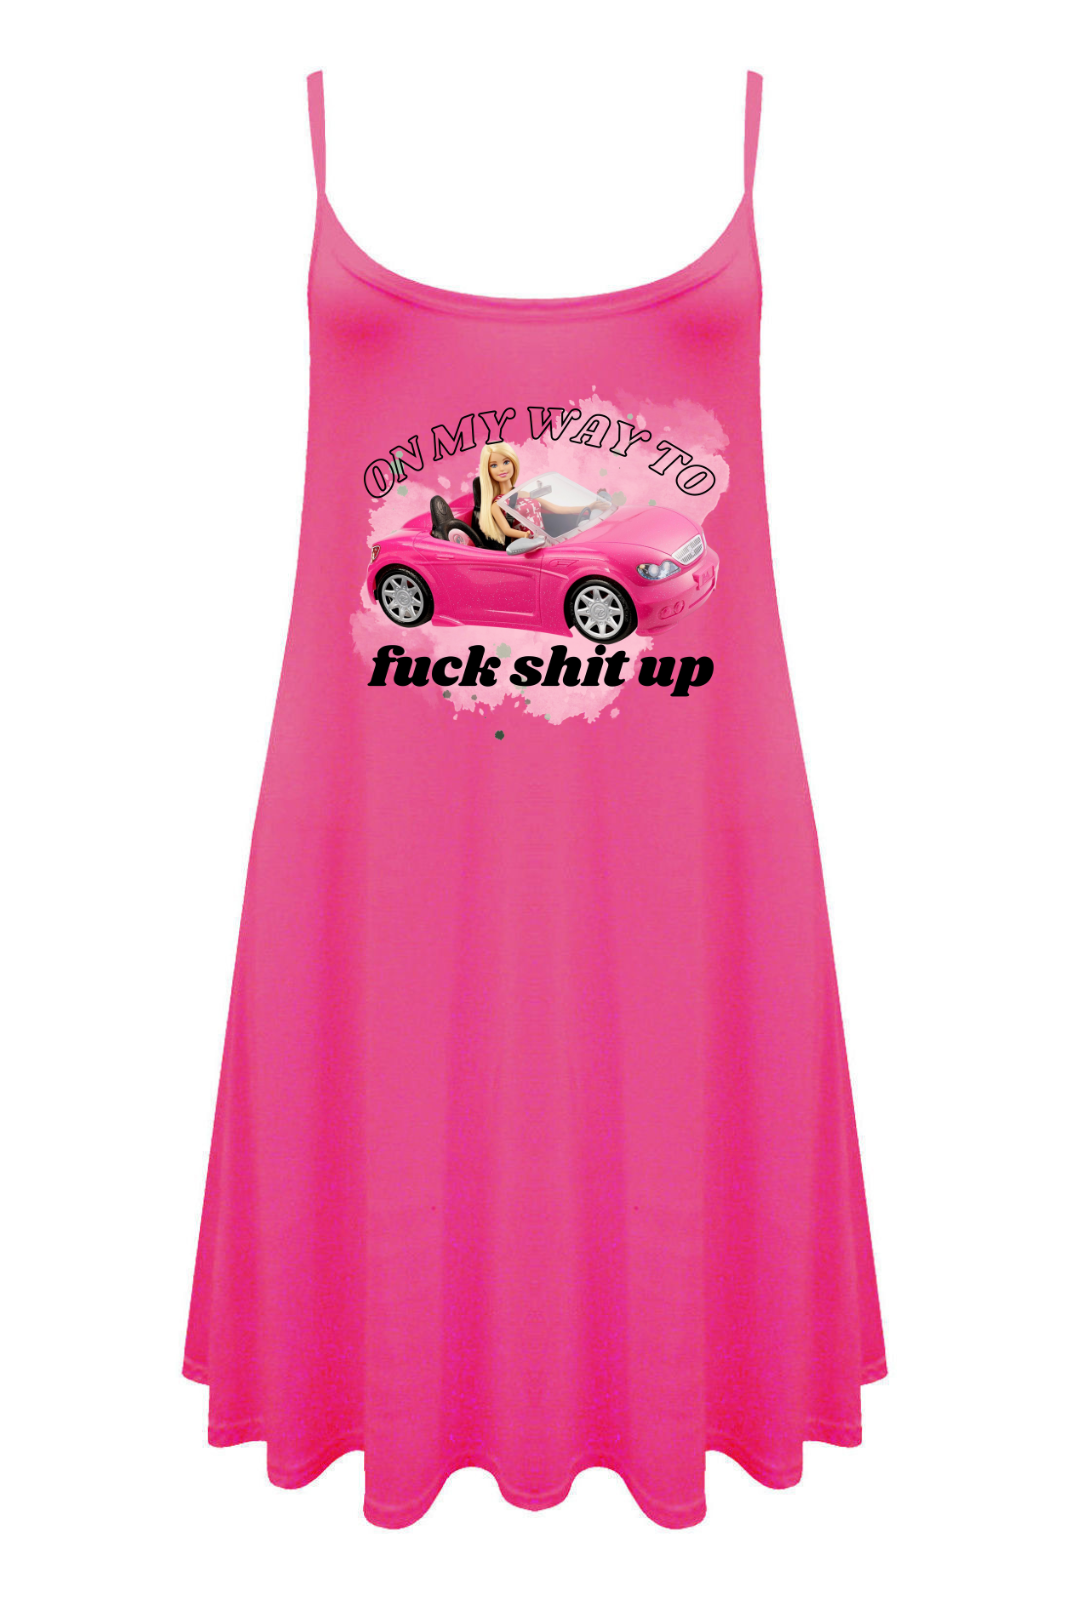 Hot Pink "On My Way" Printed Longline Camisole